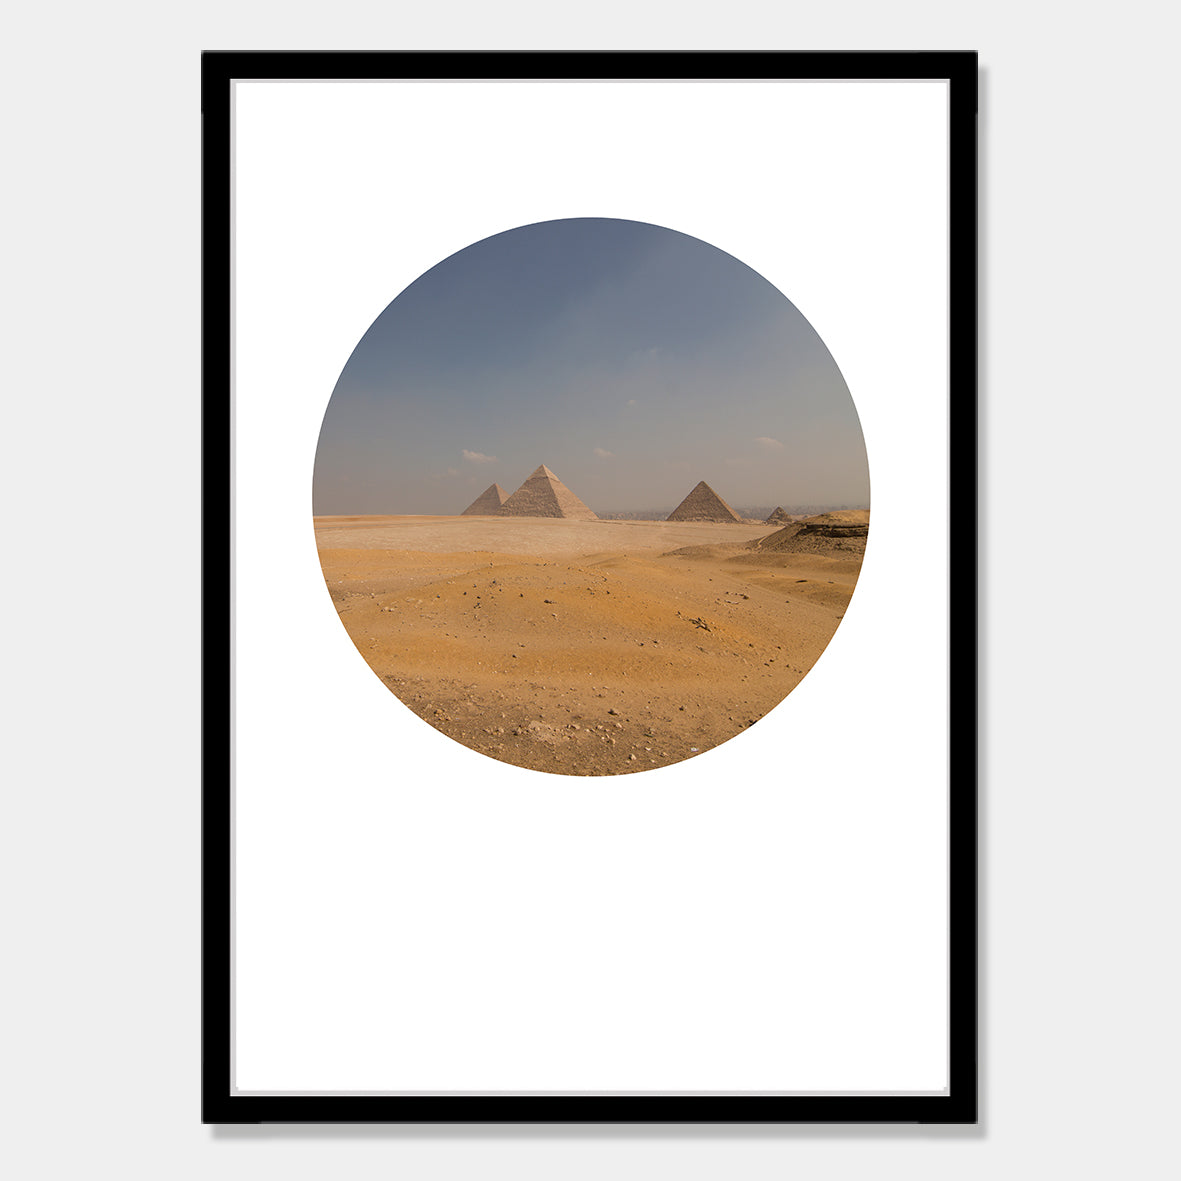 Photographic art print of the Great Pyramids, Egypt by Chris Starkey. Printed in New Zealand by endemicworld and framed in black.